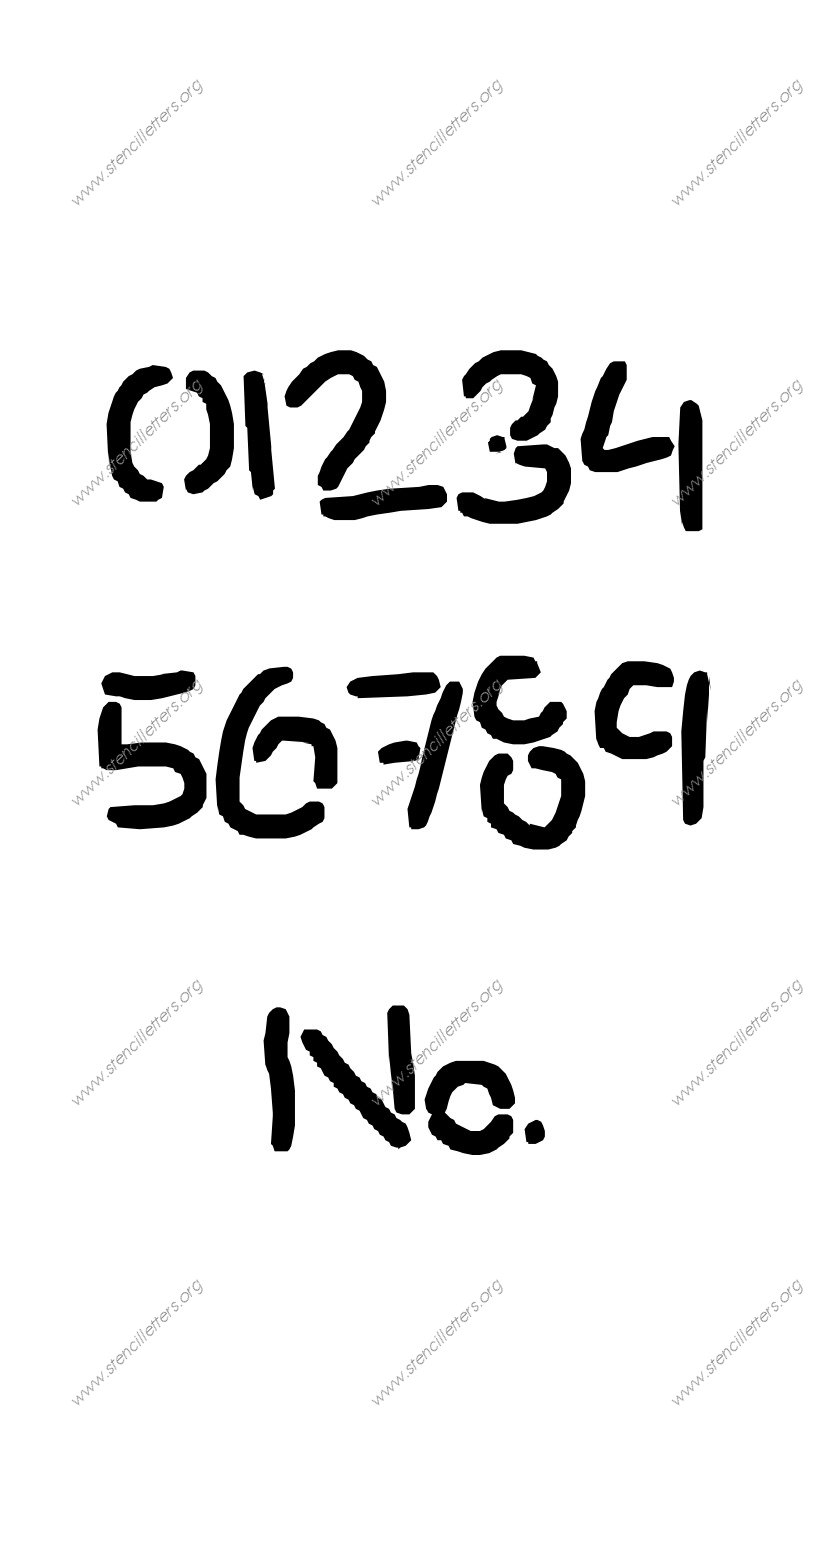 Rocky Novelty 0 to 9 number stencils